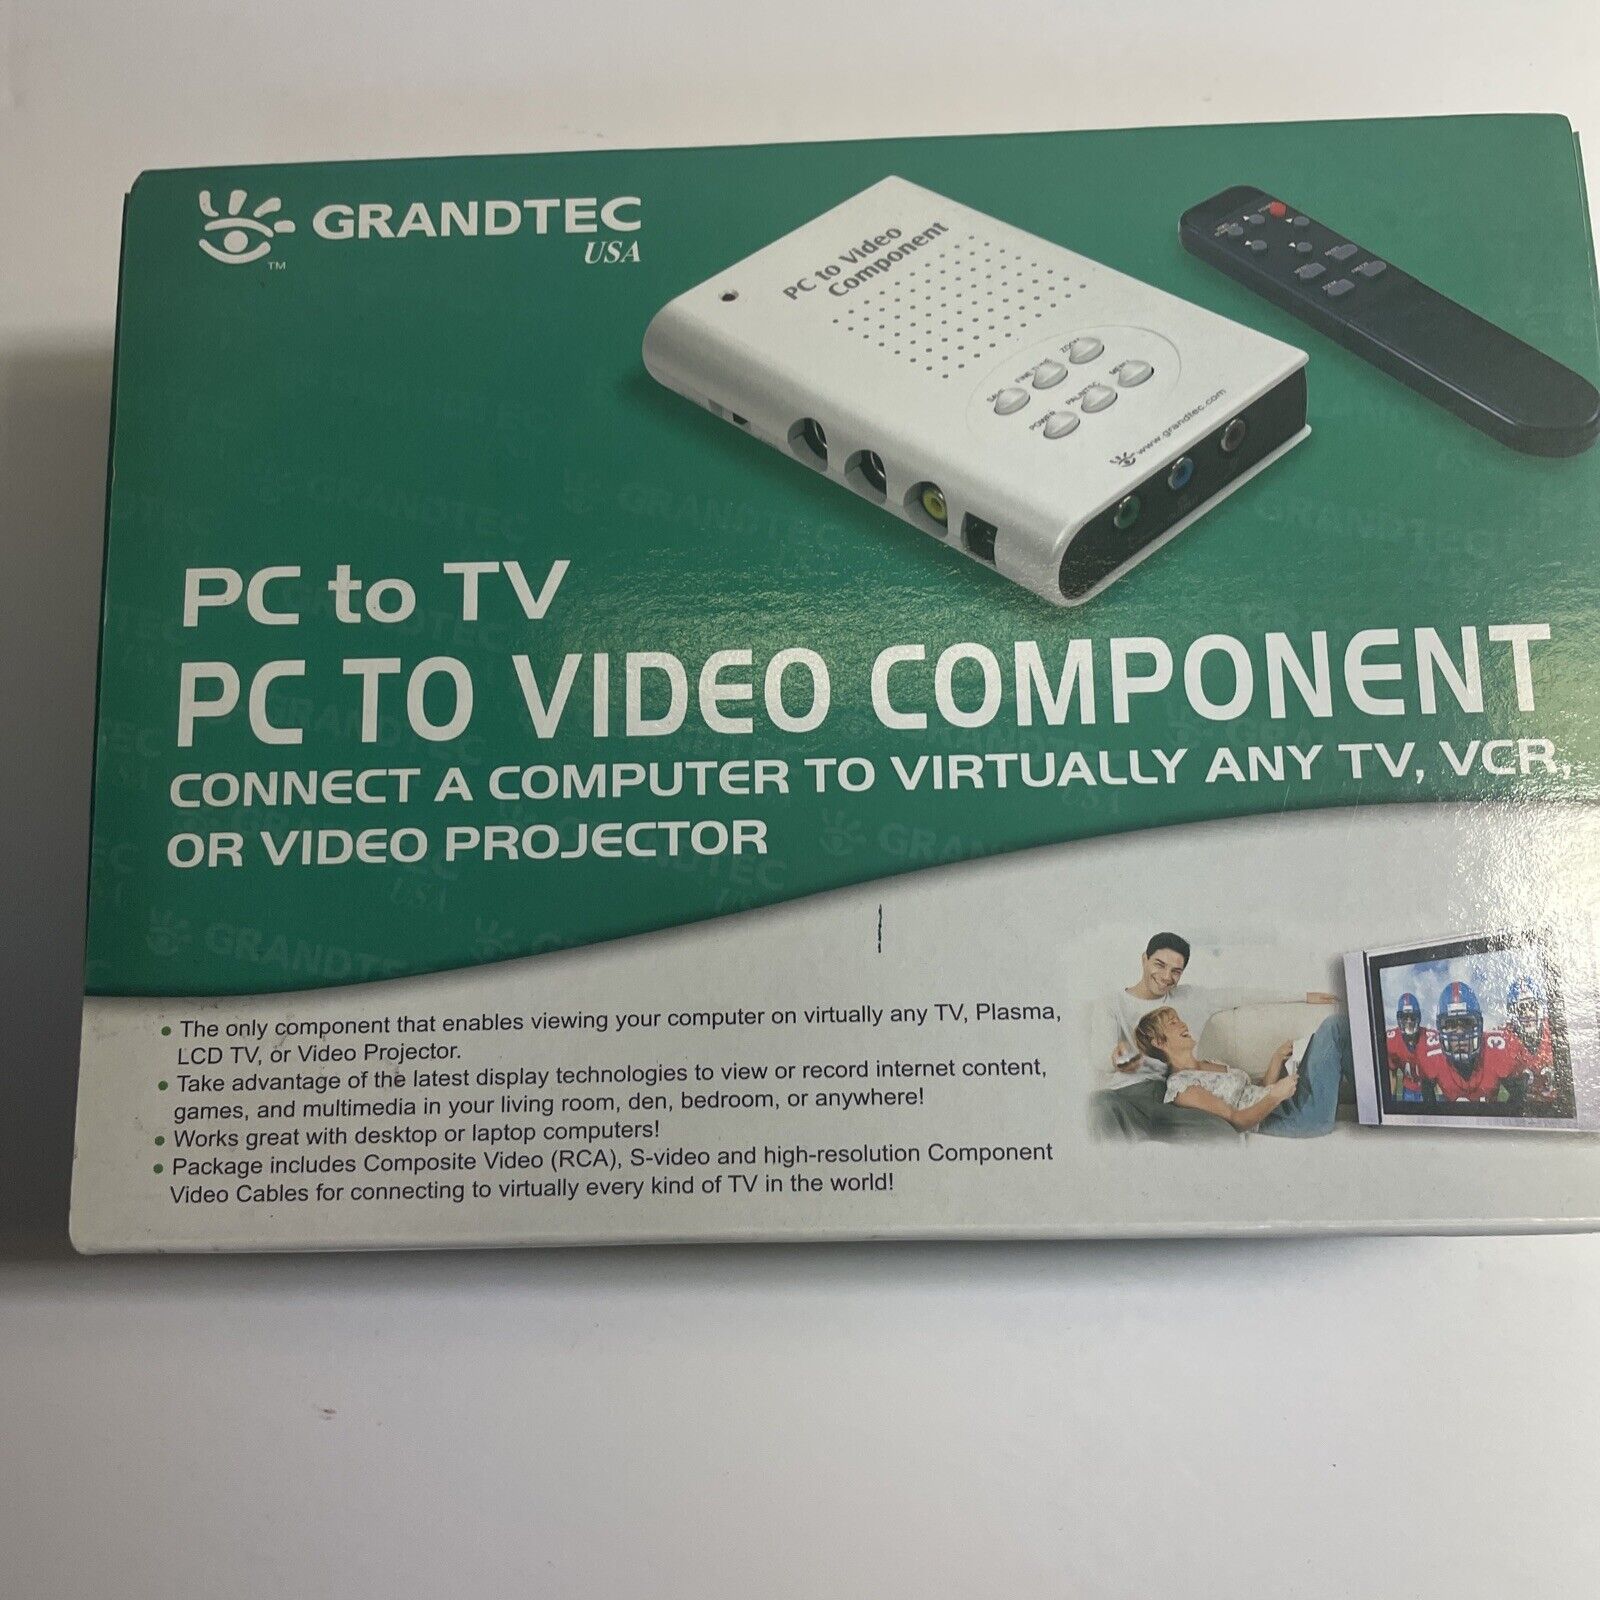 GRANDTEC PC to TV / PC TO VIDEO COMPONENT SYSTEM GXP-2000 with cables and box